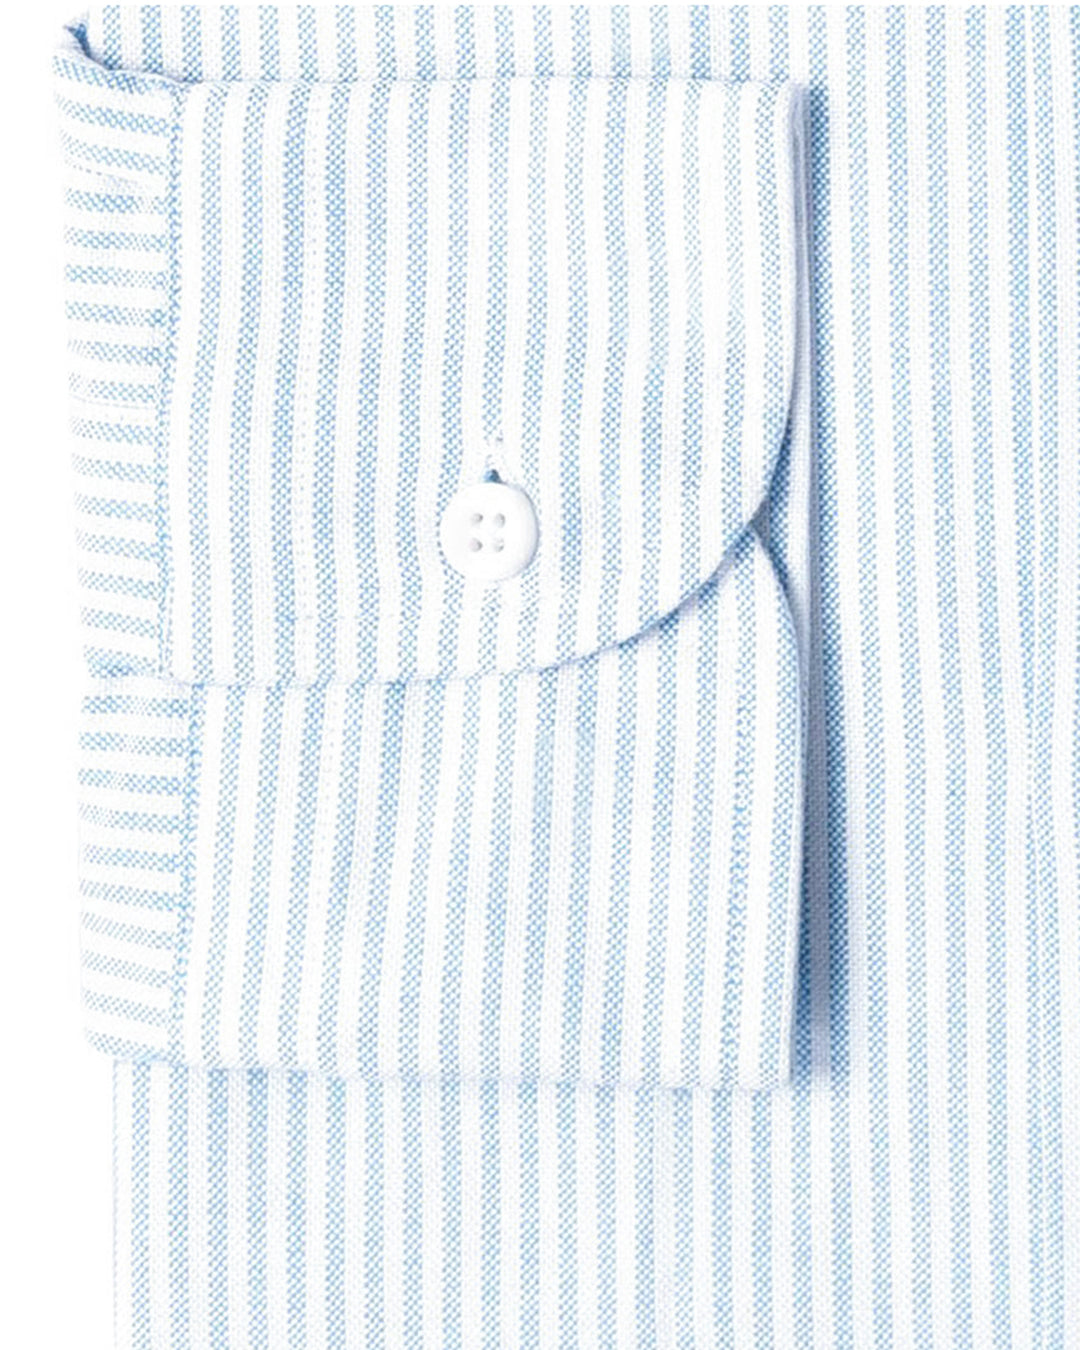 Cuff of the custom oxford shirt for men by Luxire in white with light blue stripes